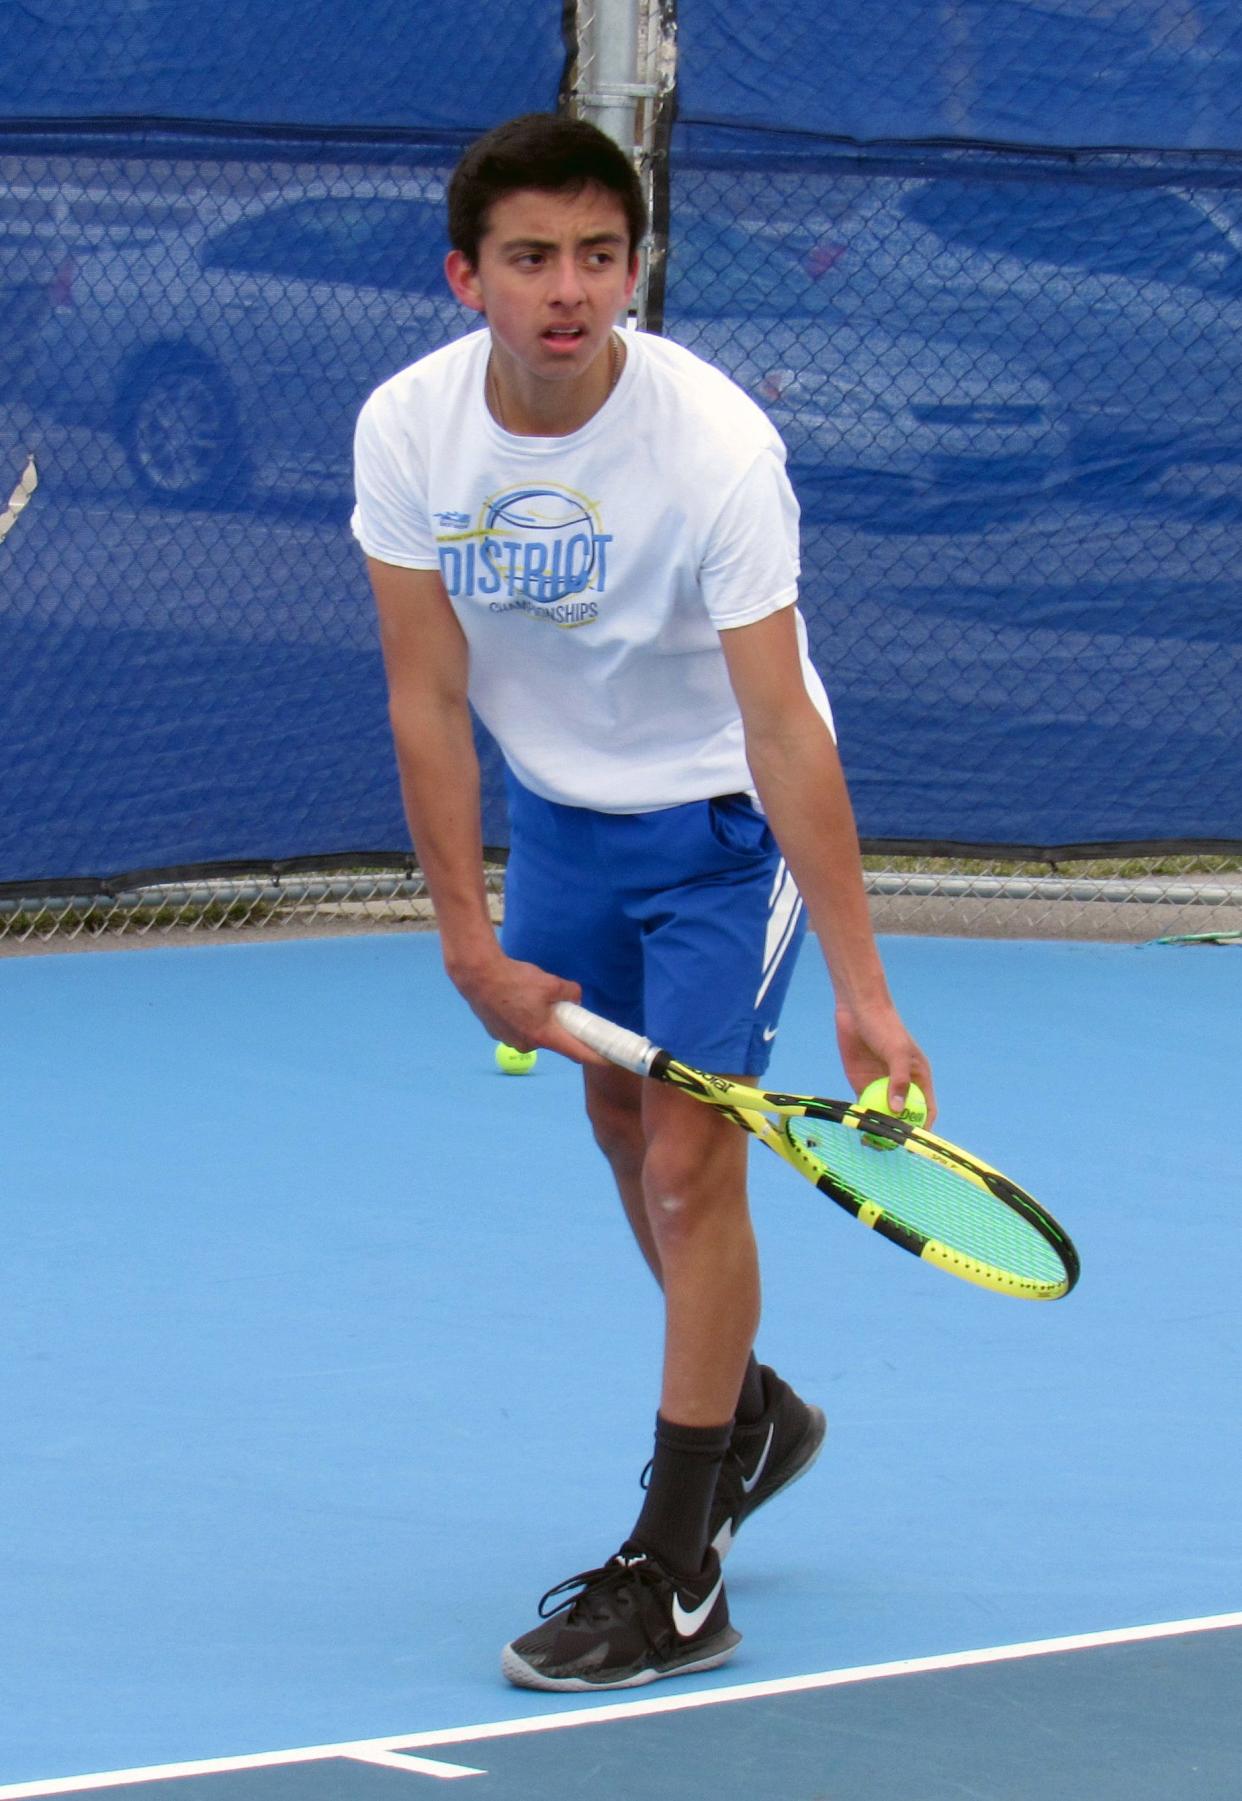 Berlin junior singles player Josh McKnight fell one win short of reaching his first Division I state tournament. The doubles team of senior Kathir Maarikarthykeyan and sophomore Logan Van Horne also lost in a state-qualifying match.